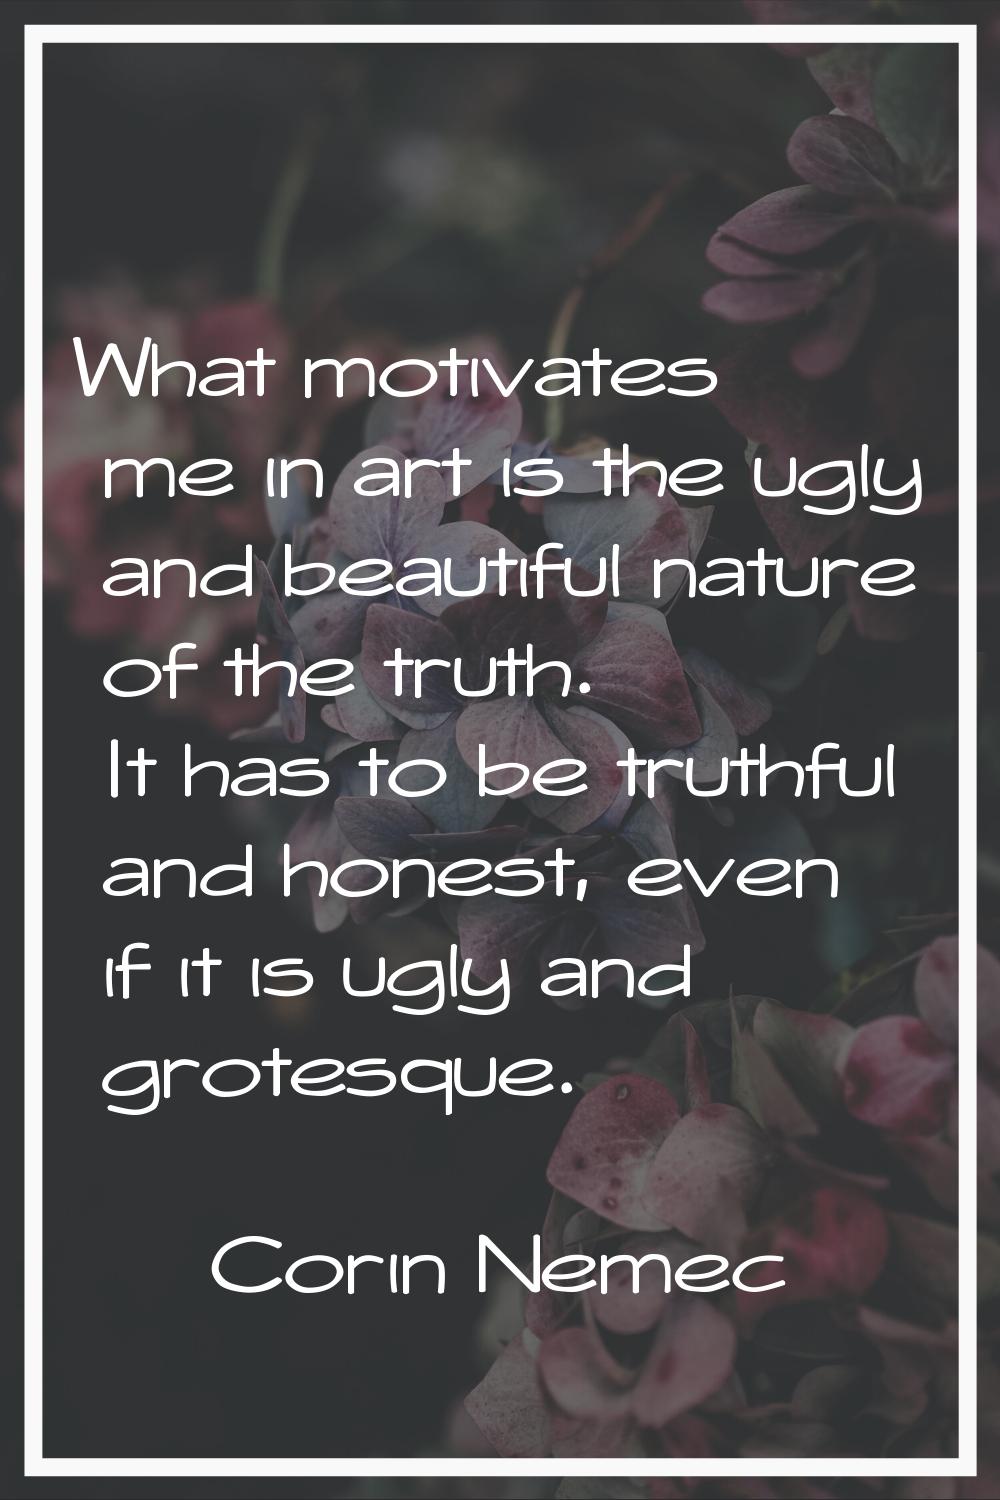 What motivates me in art is the ugly and beautiful nature of the truth. It has to be truthful and h